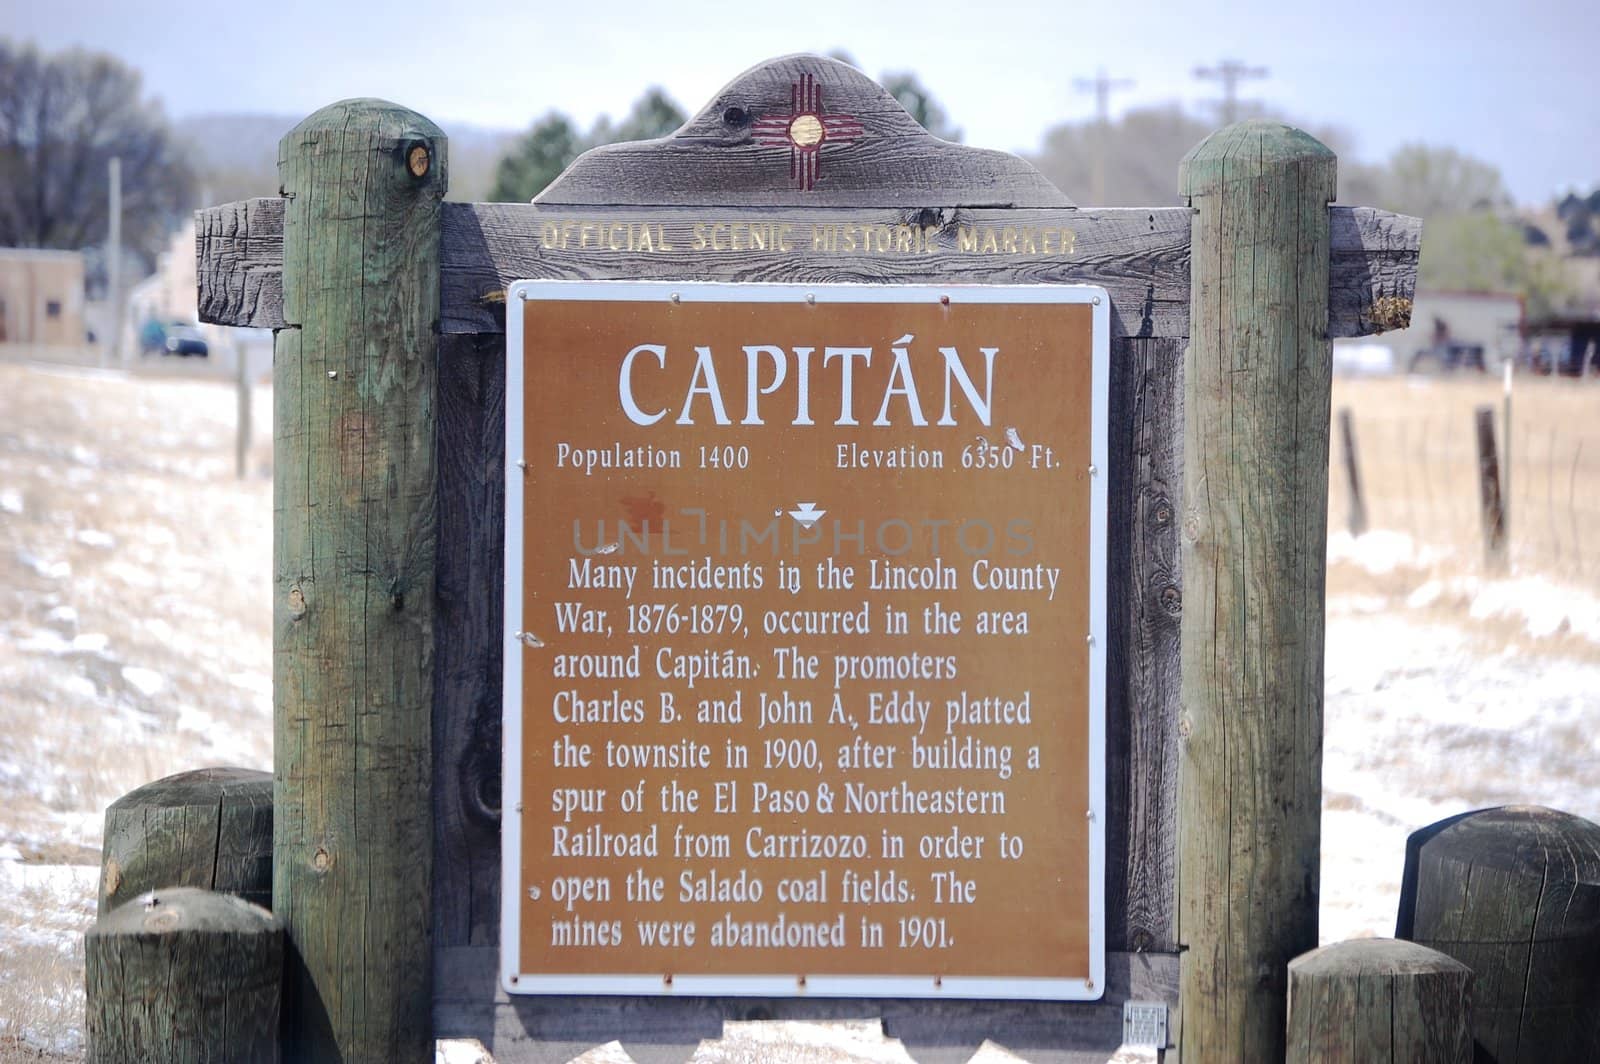 Capitan New Mexico Historic Marker by RefocusPhoto